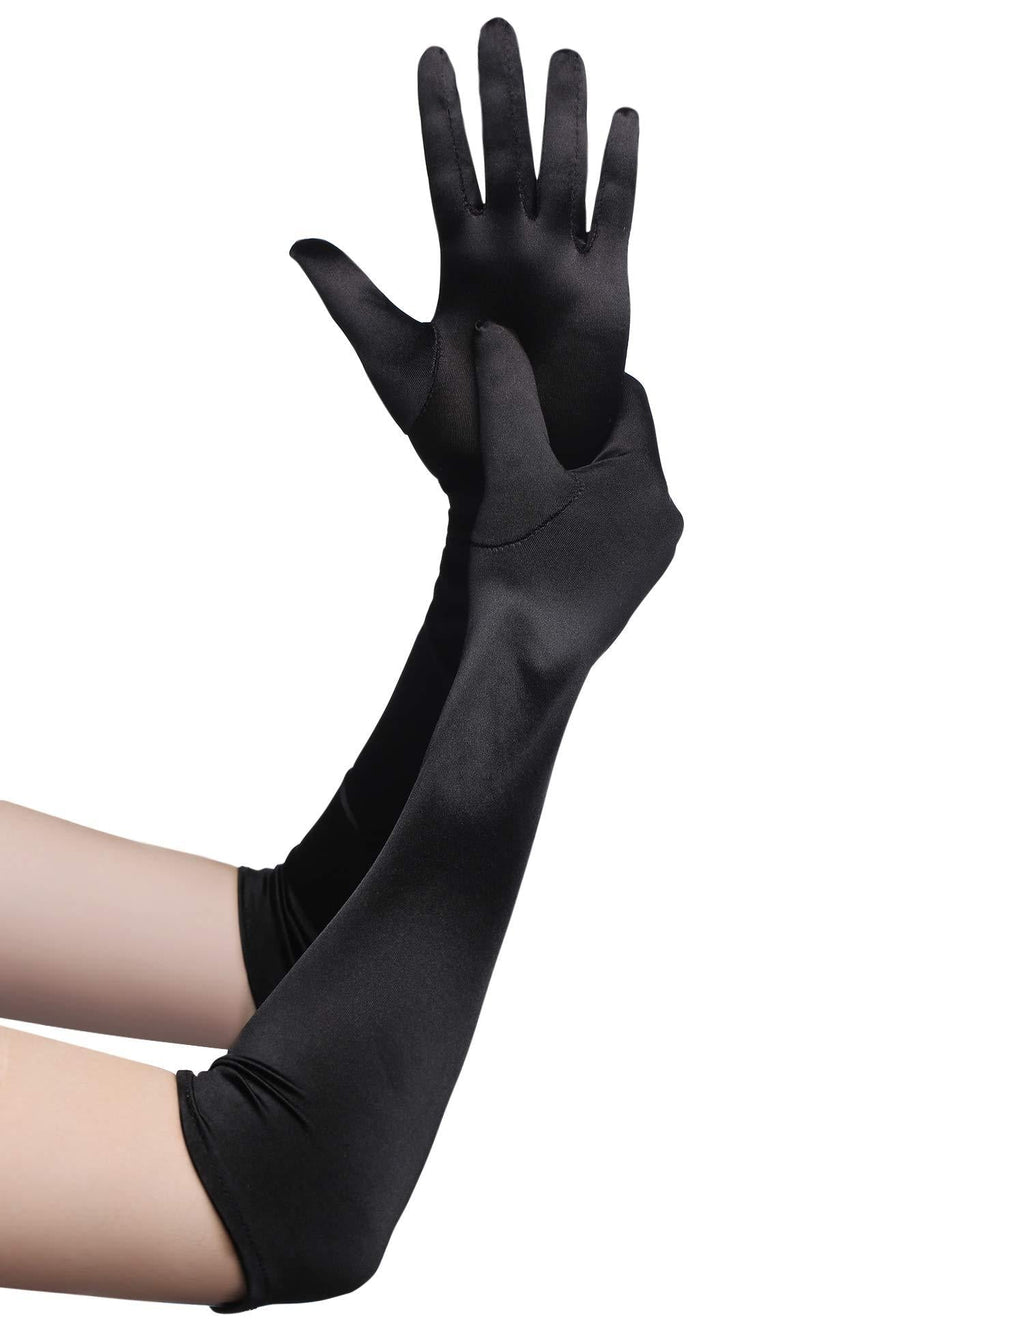 [Australia] - BABEYOND Long Opera Party 20s Satin Gloves Stretchy Adult Size Elbow Length Smooth 21.6in-black 